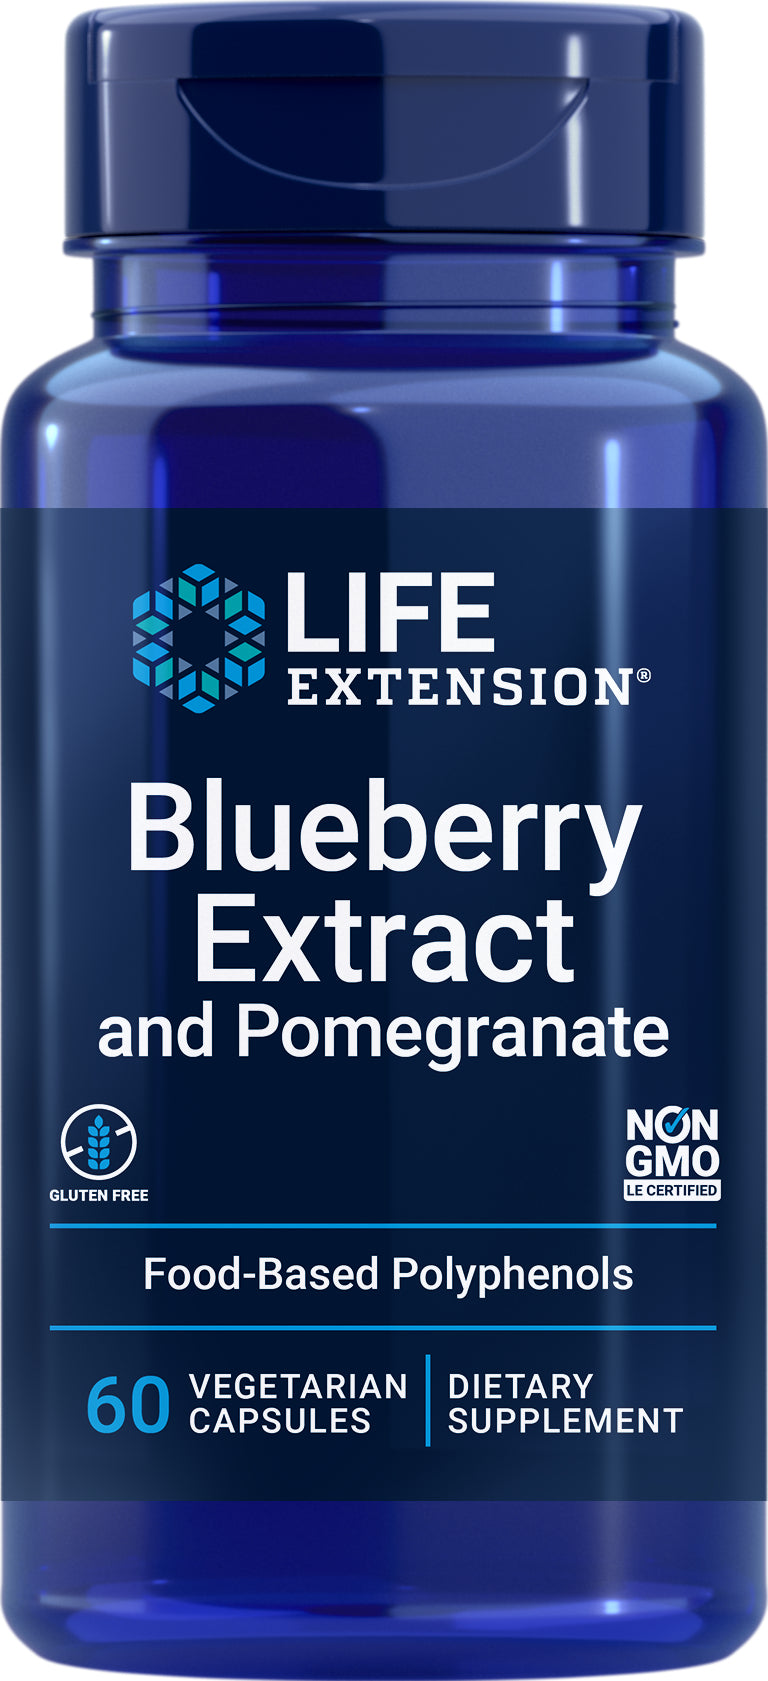 Blueberry Extract and Pomegranate 60 veg caps by Life Extension